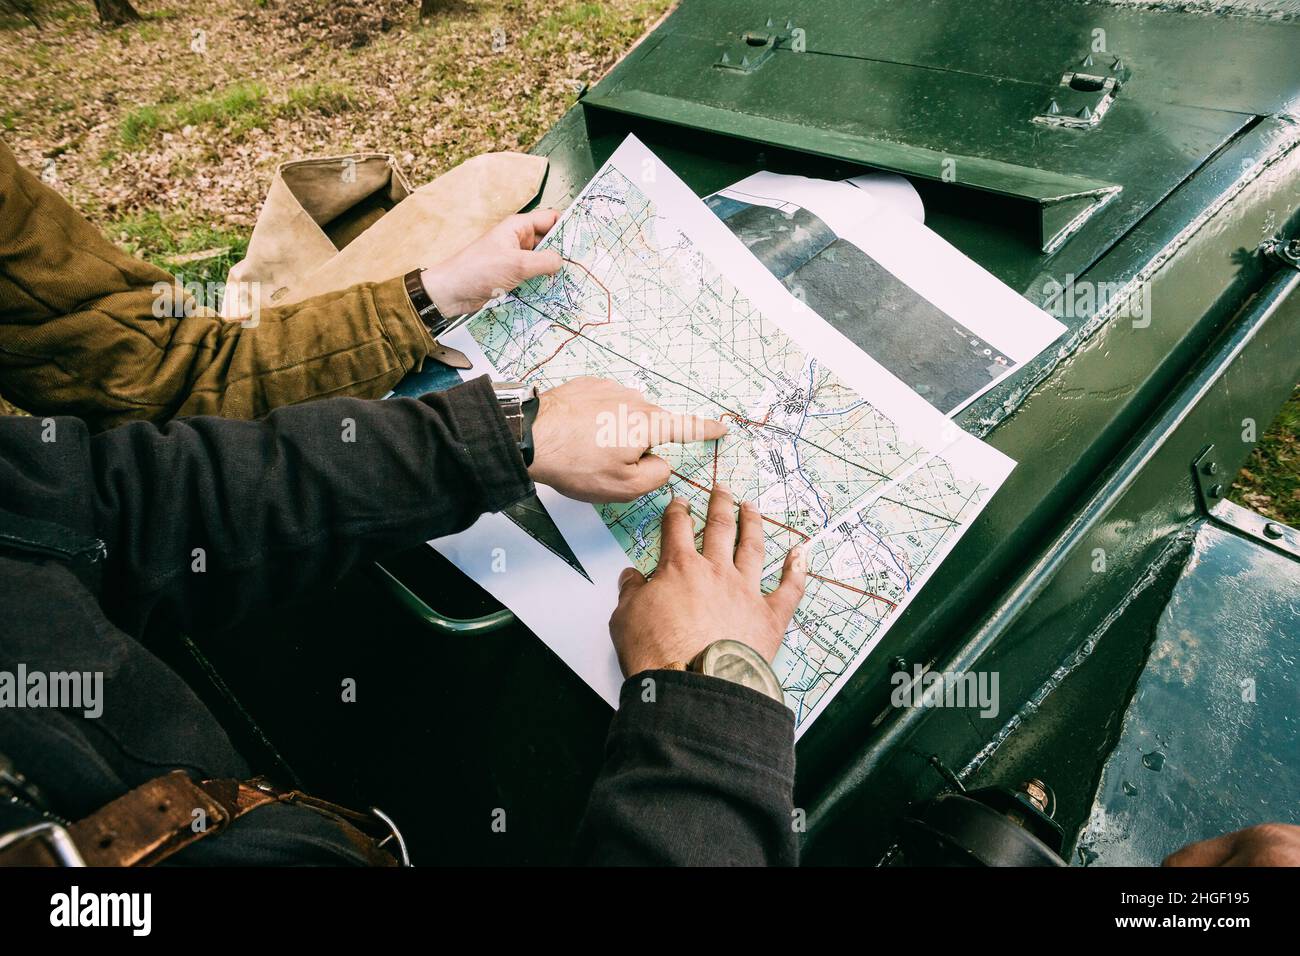 Re-enactor Dressed As Russian Soviet Crew Member Tank Commander Soldier Of World War Ii Briefs, Showing Direction Of A Platoon Attack On Map Lying On Stock Photo